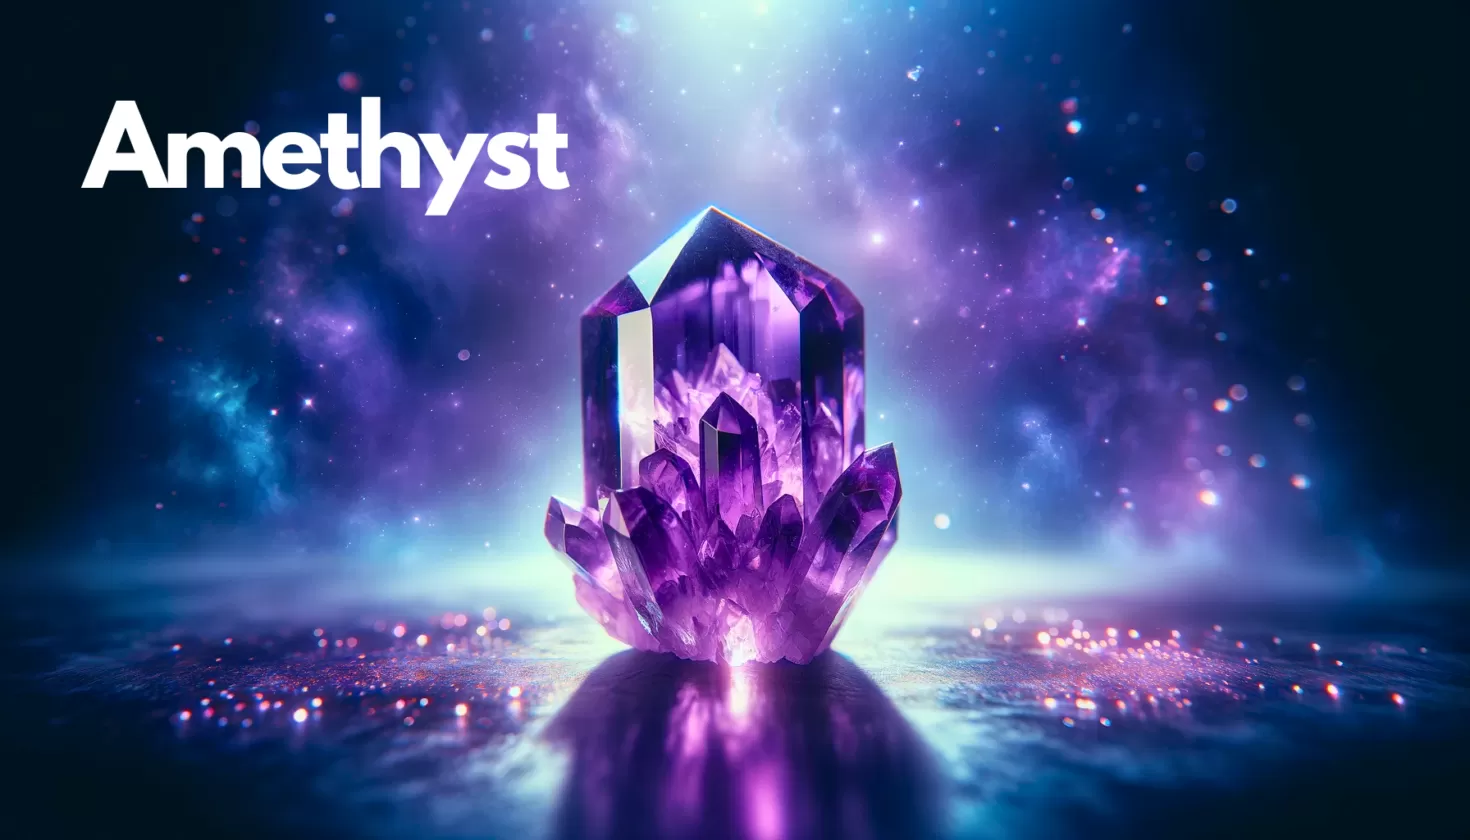 Featured Image for Amethyst Meaning. Gorgeous Wide Image of an Amethyst, vibrant background.